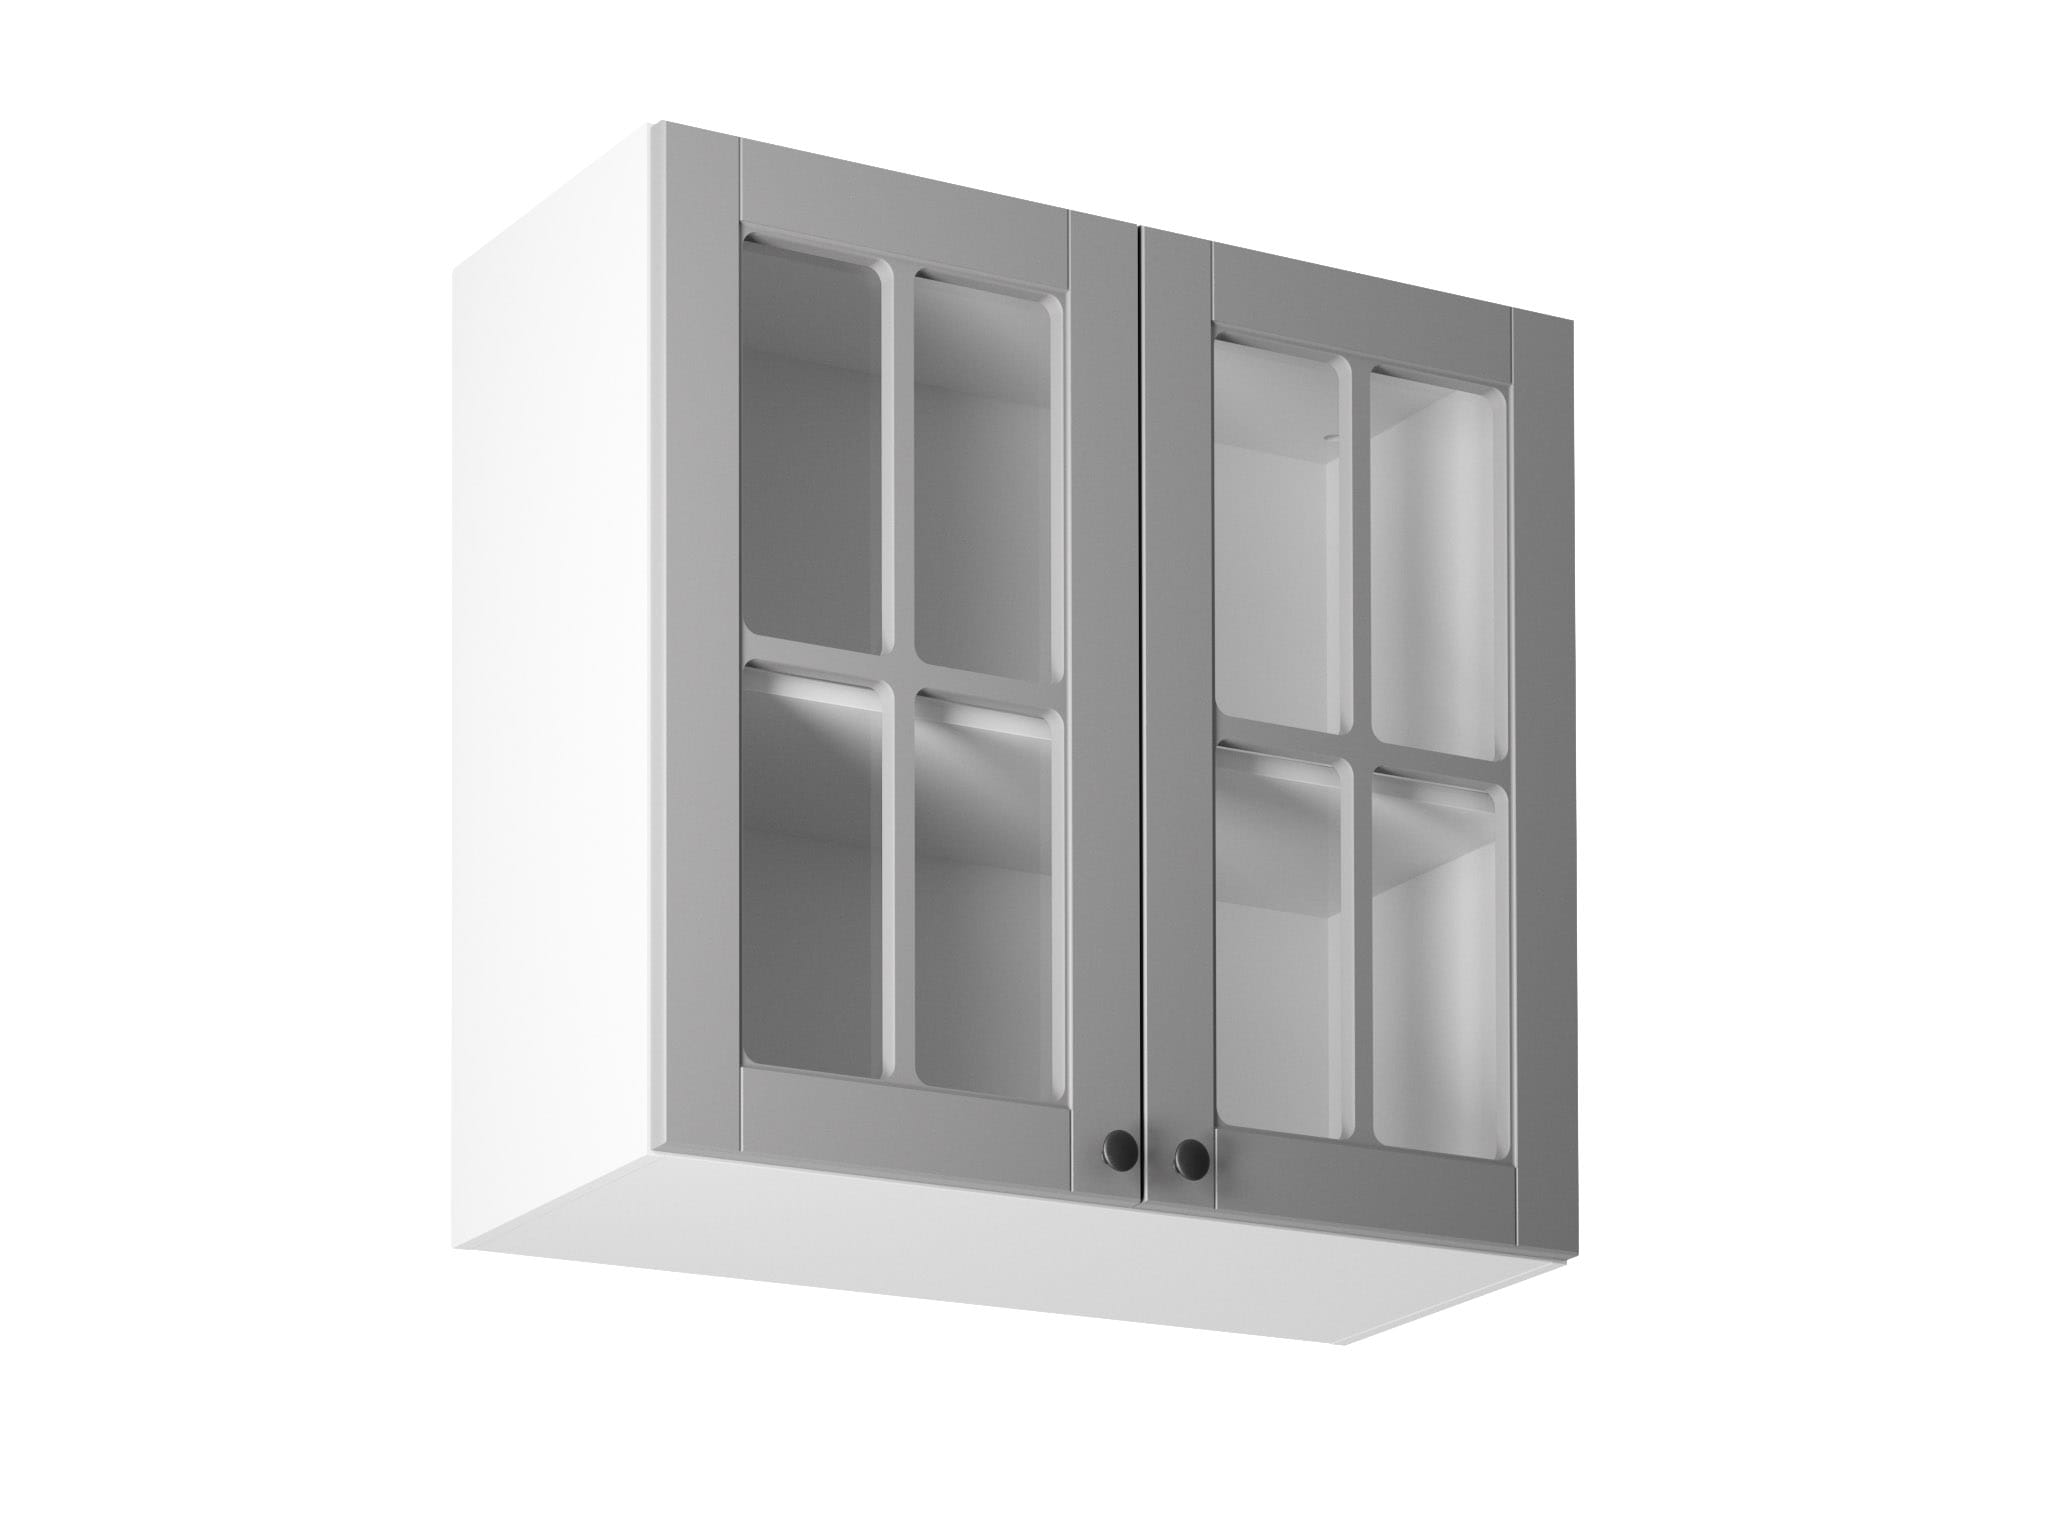 TWO-DOOR KITCHEN WALL CABINET IN WHITE WITH GLASS INSERTS G80S